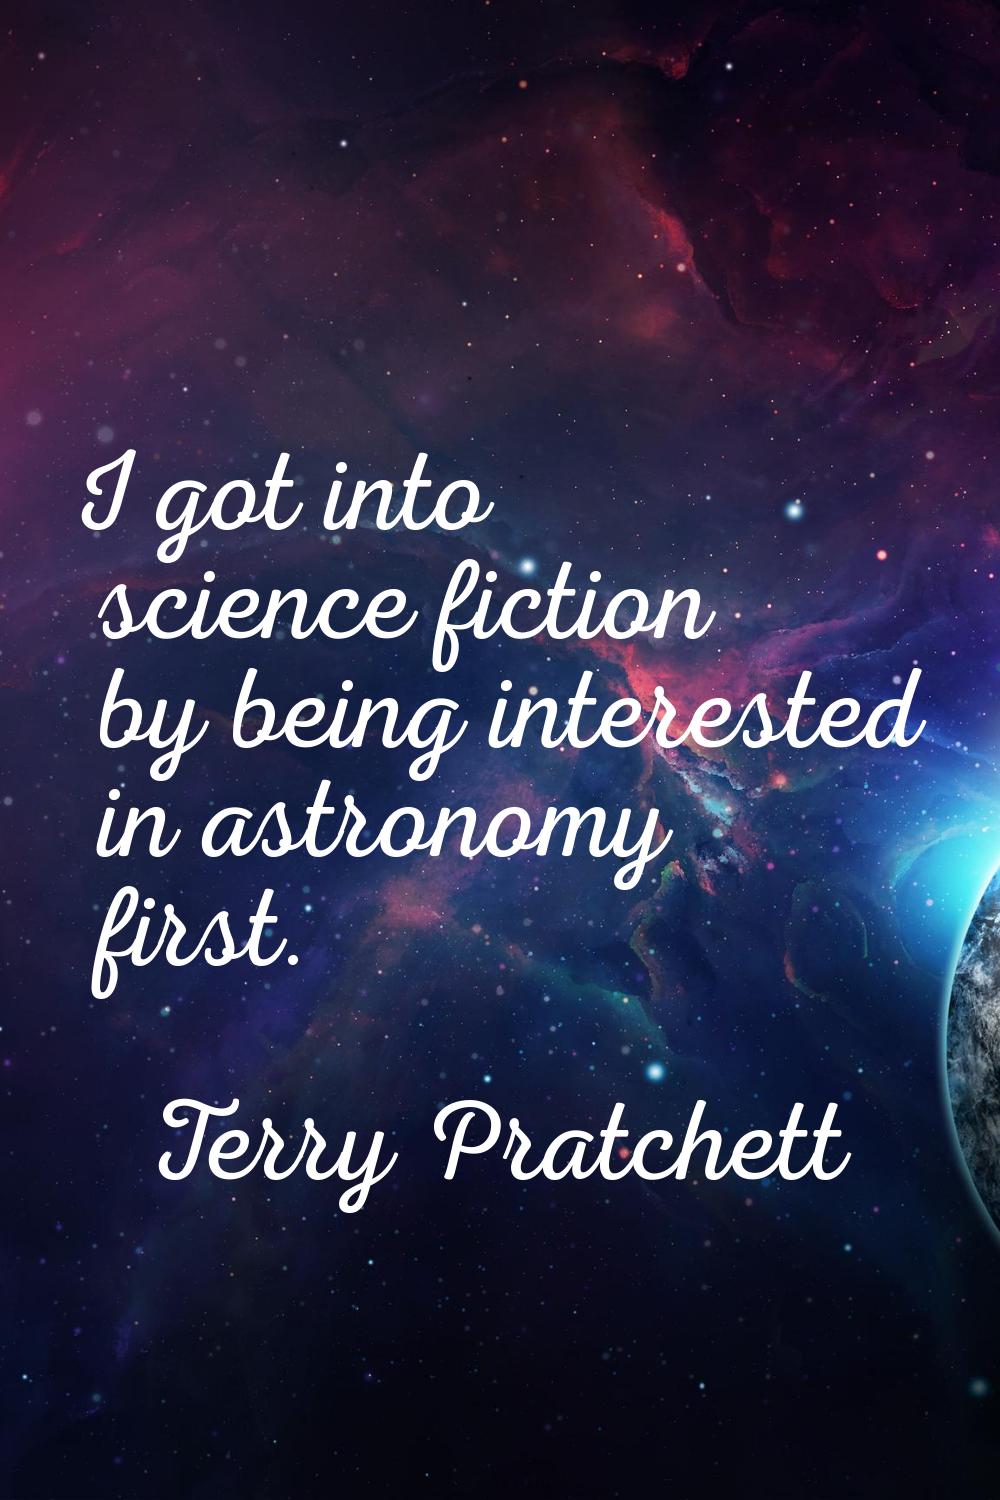 I got into science fiction by being interested in astronomy first.